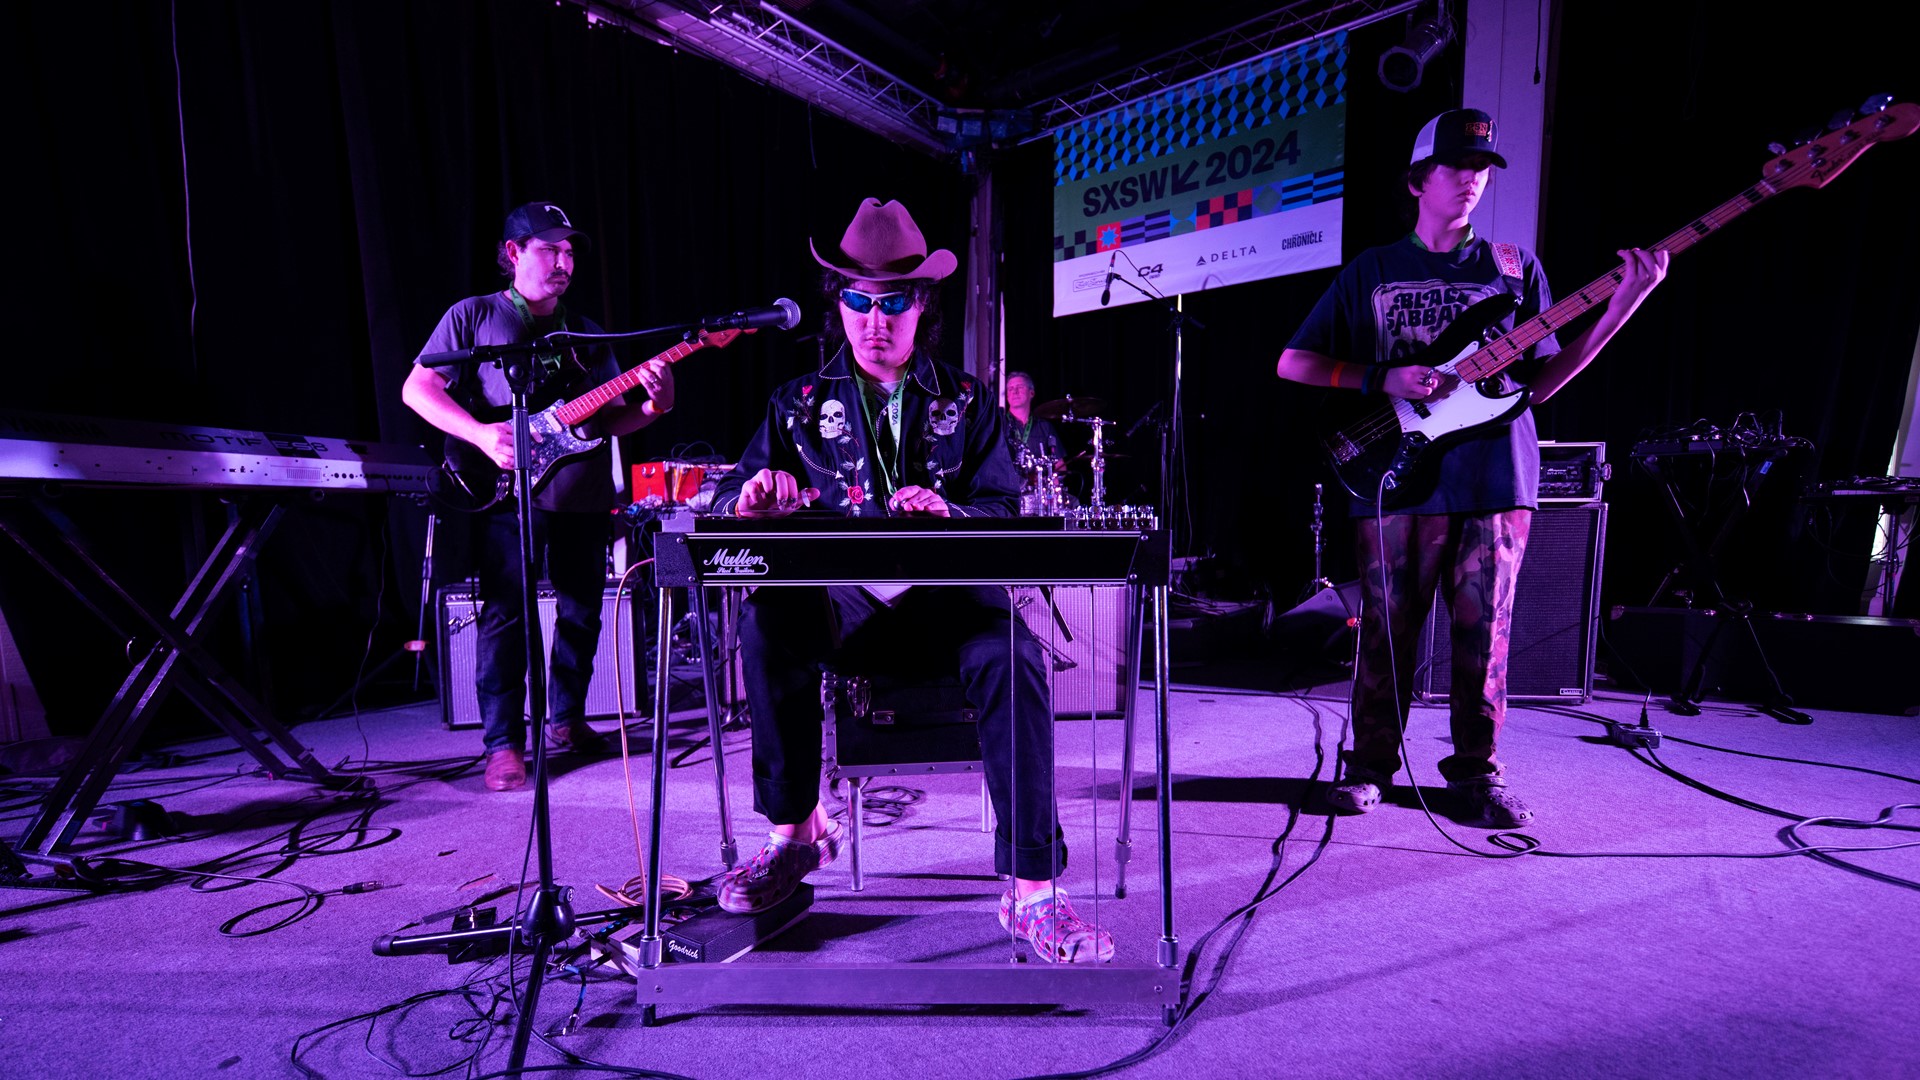 Through a multi-million dollar grant program, the city of Austin is giving local artists a chance to create more and build up the local music scene.